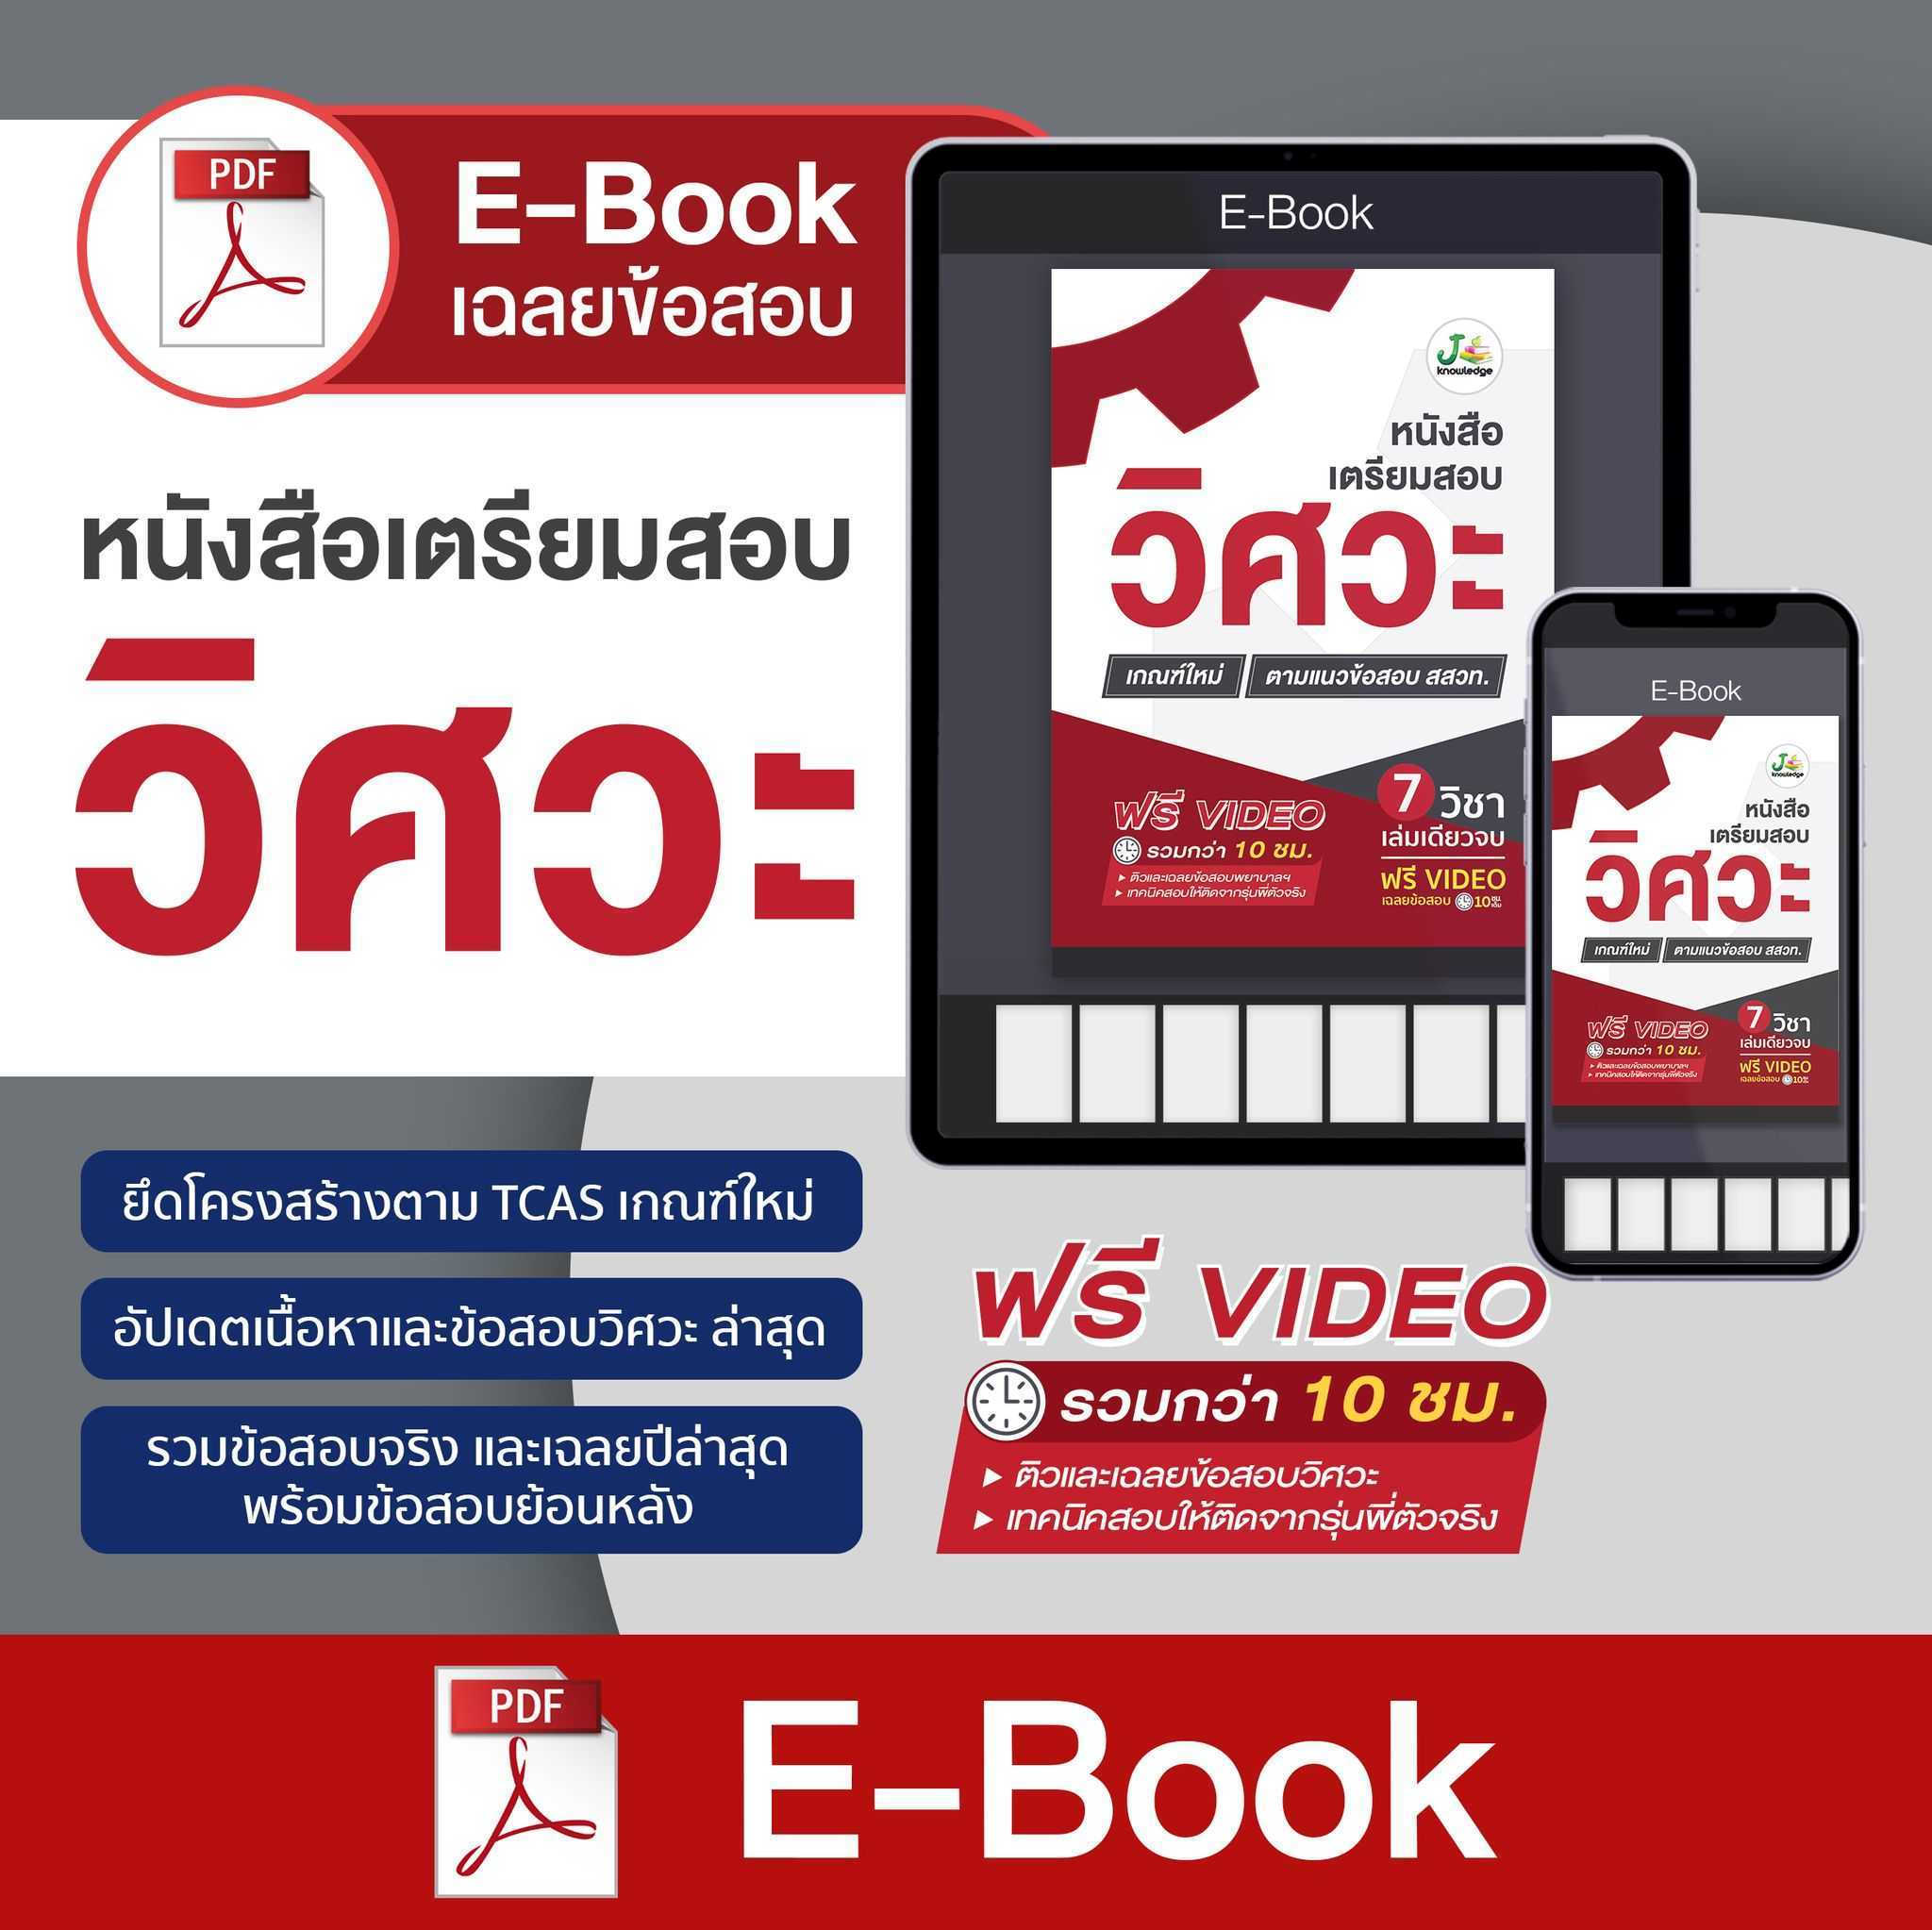 Lazada Thailand - E-book to prepare for the engineering exam, free, 10 hours of tutoring courses to prepare for the engineering aptitude test, PAT 3